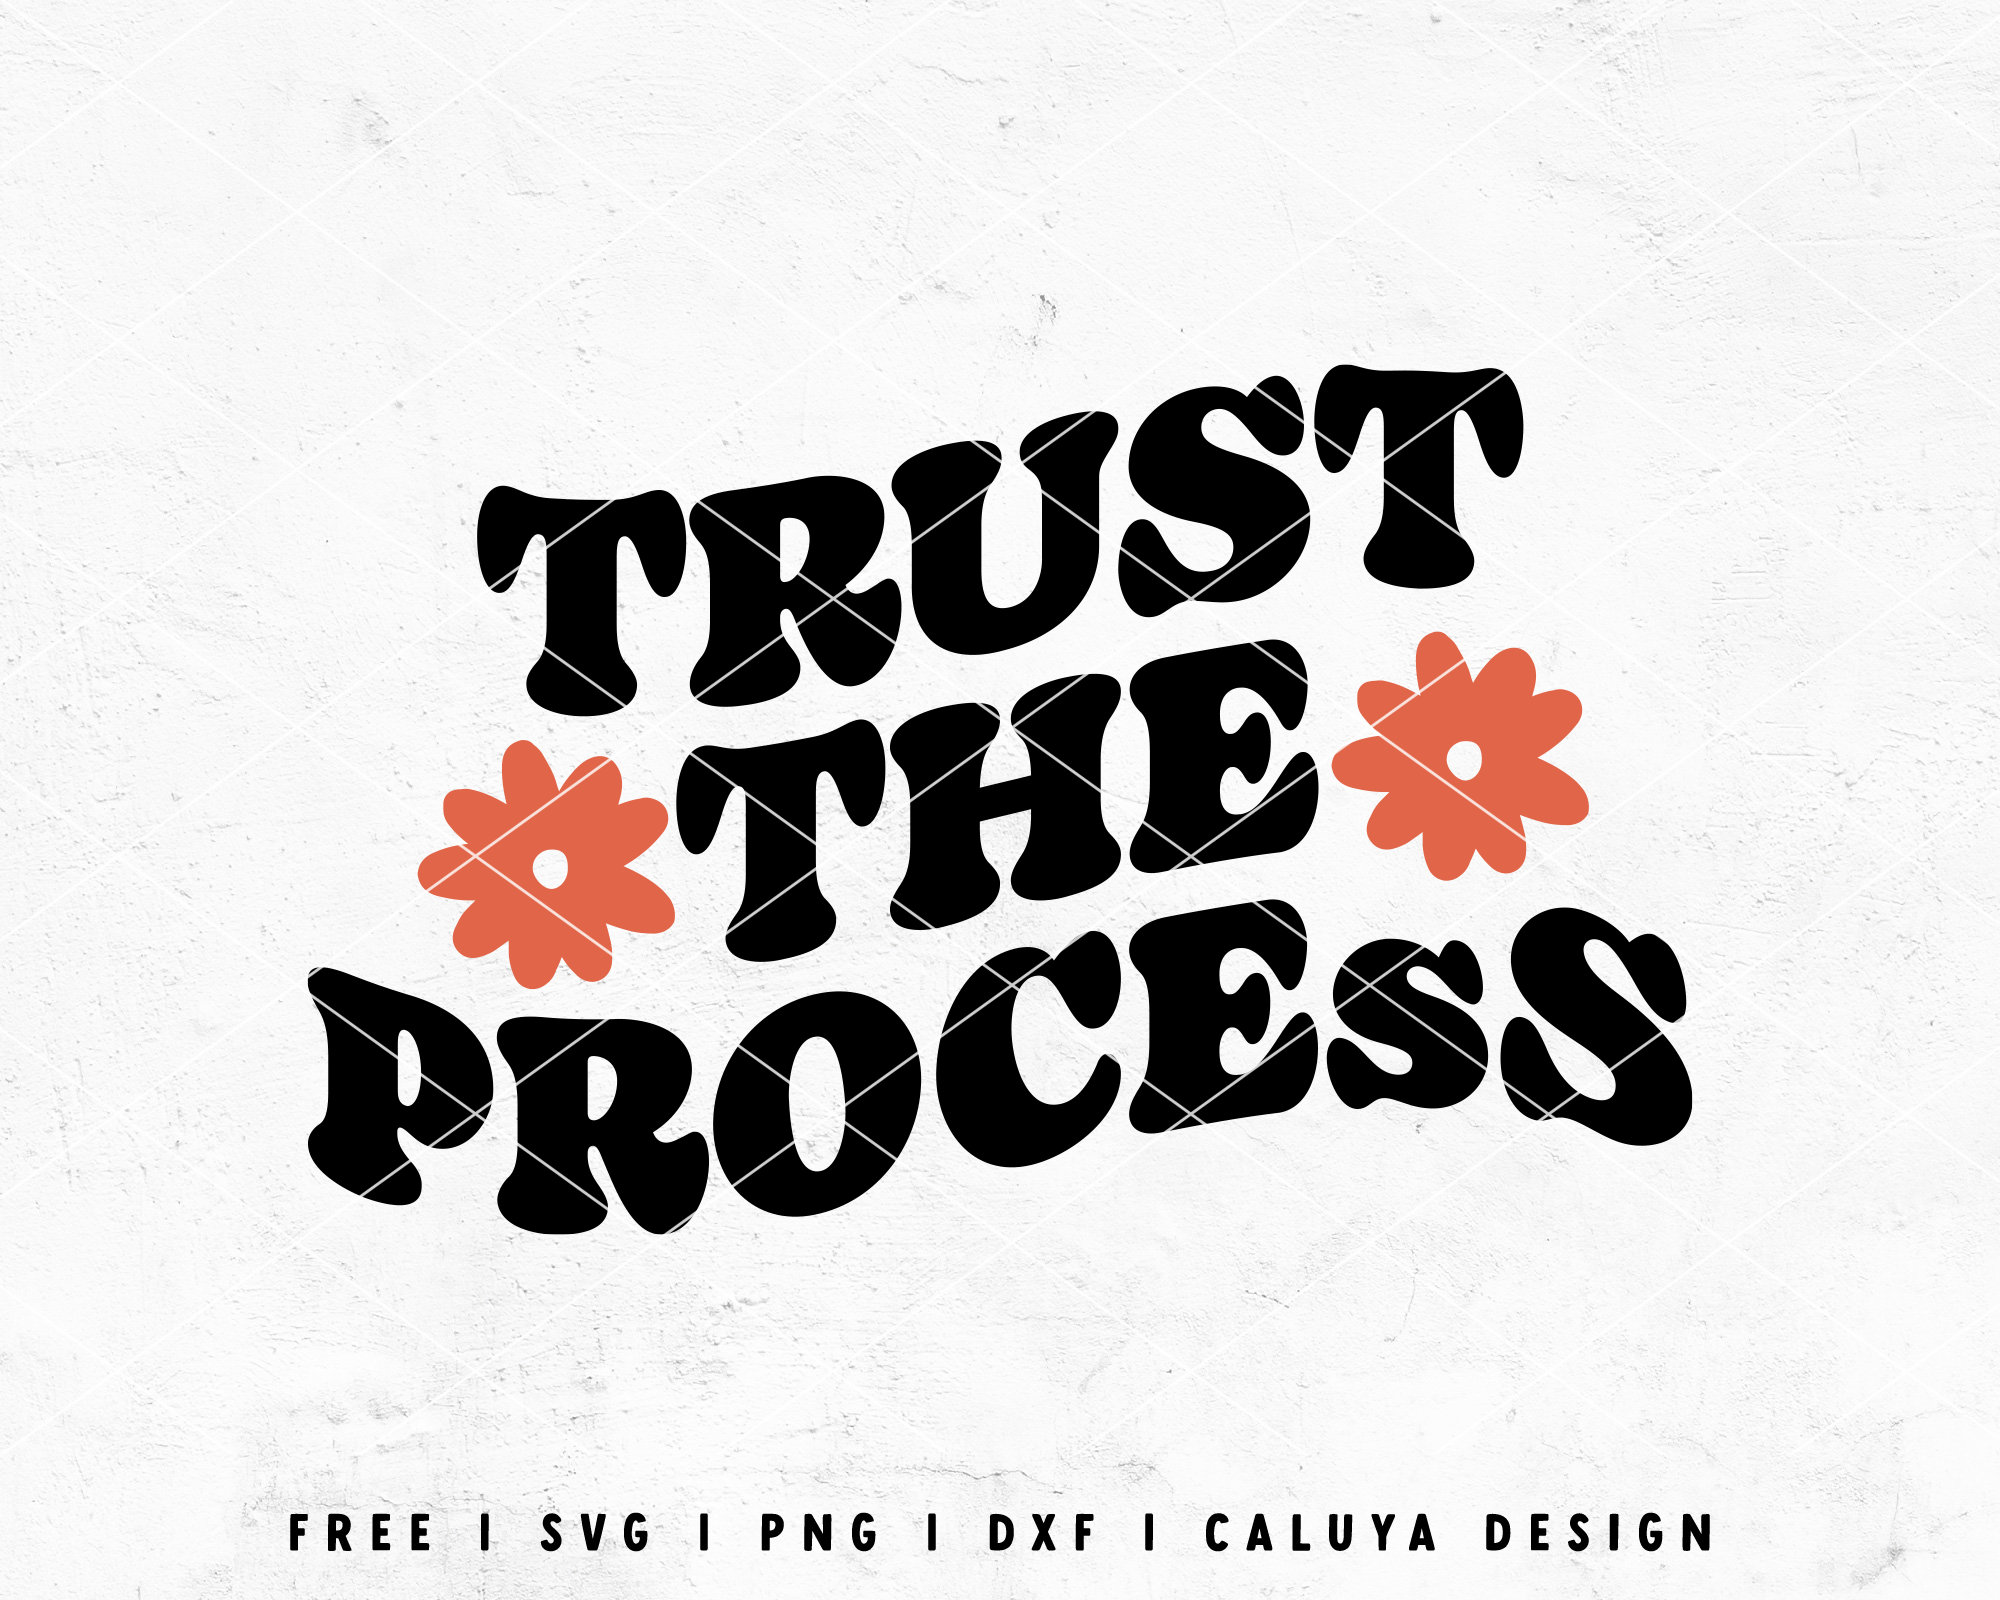 Processes, Free Full-Text